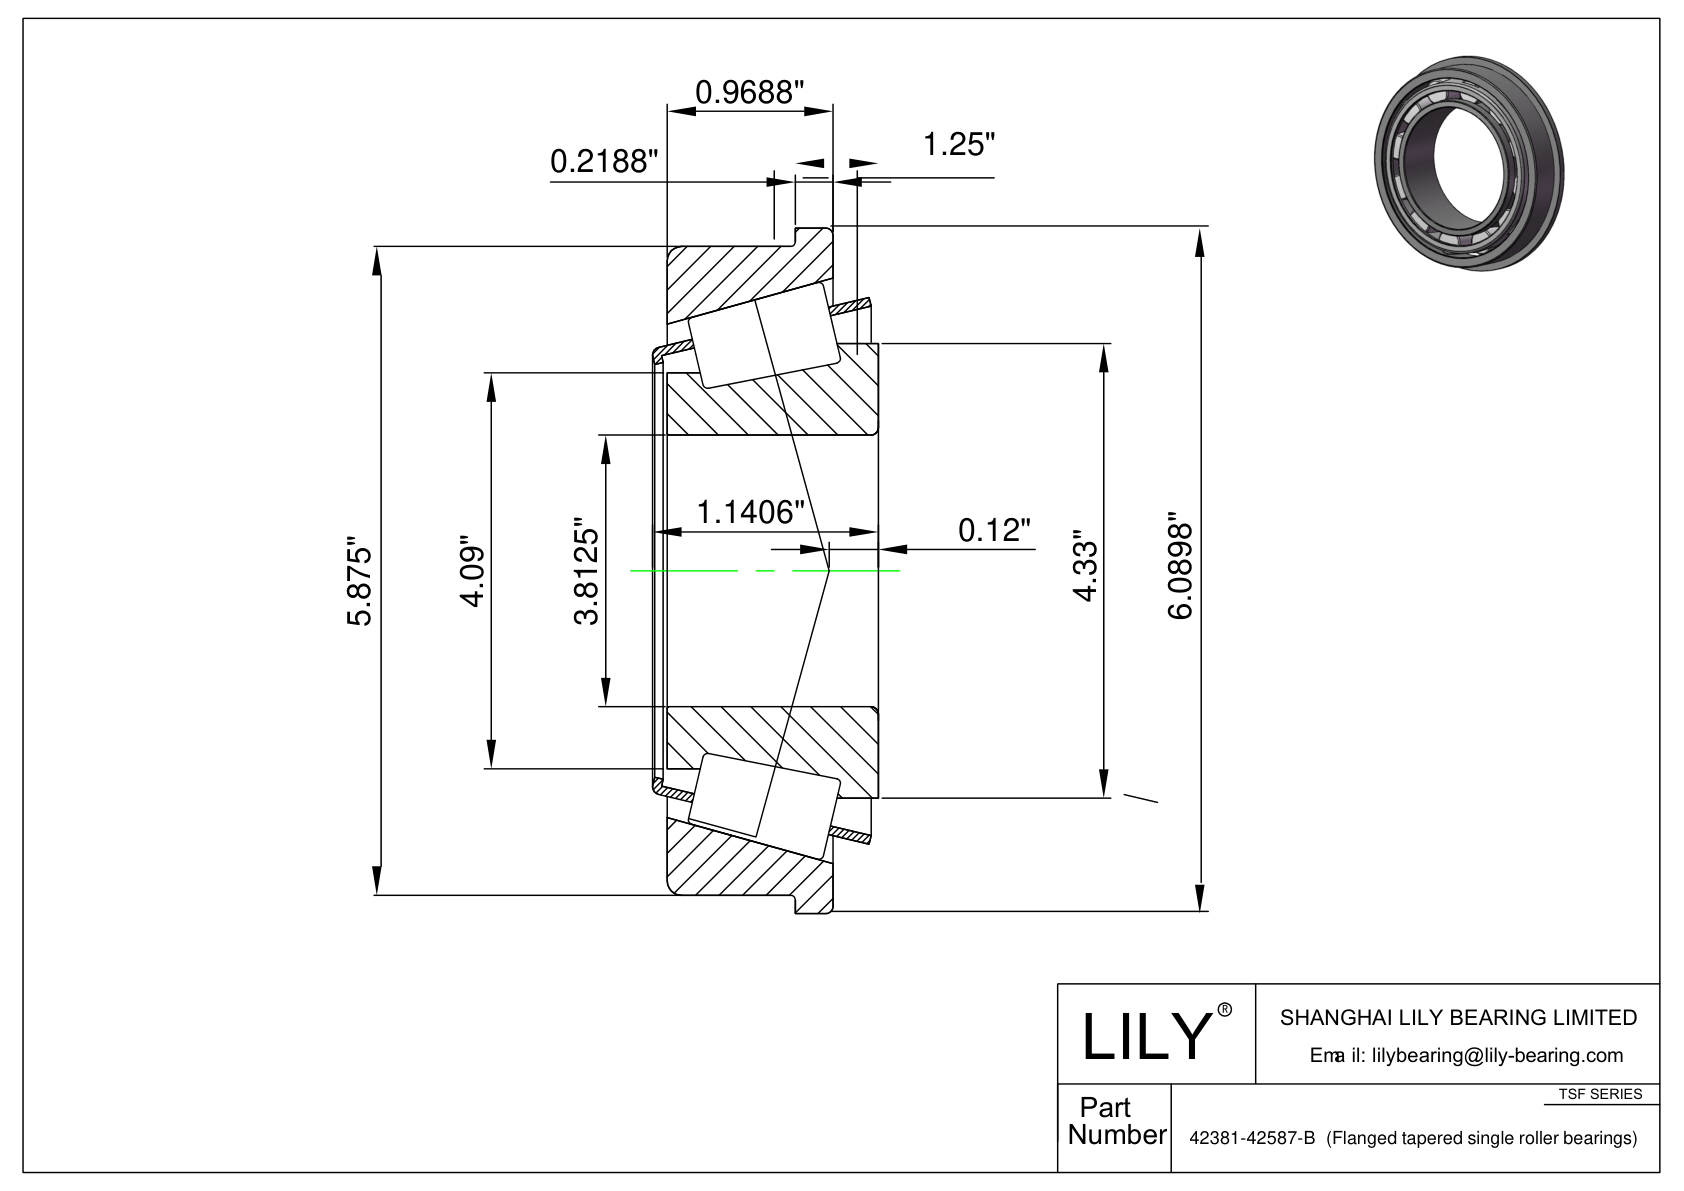 42381-42587-B TSF (Tapered Single Roller Bearings with Flange) (Imperial) cad drawing